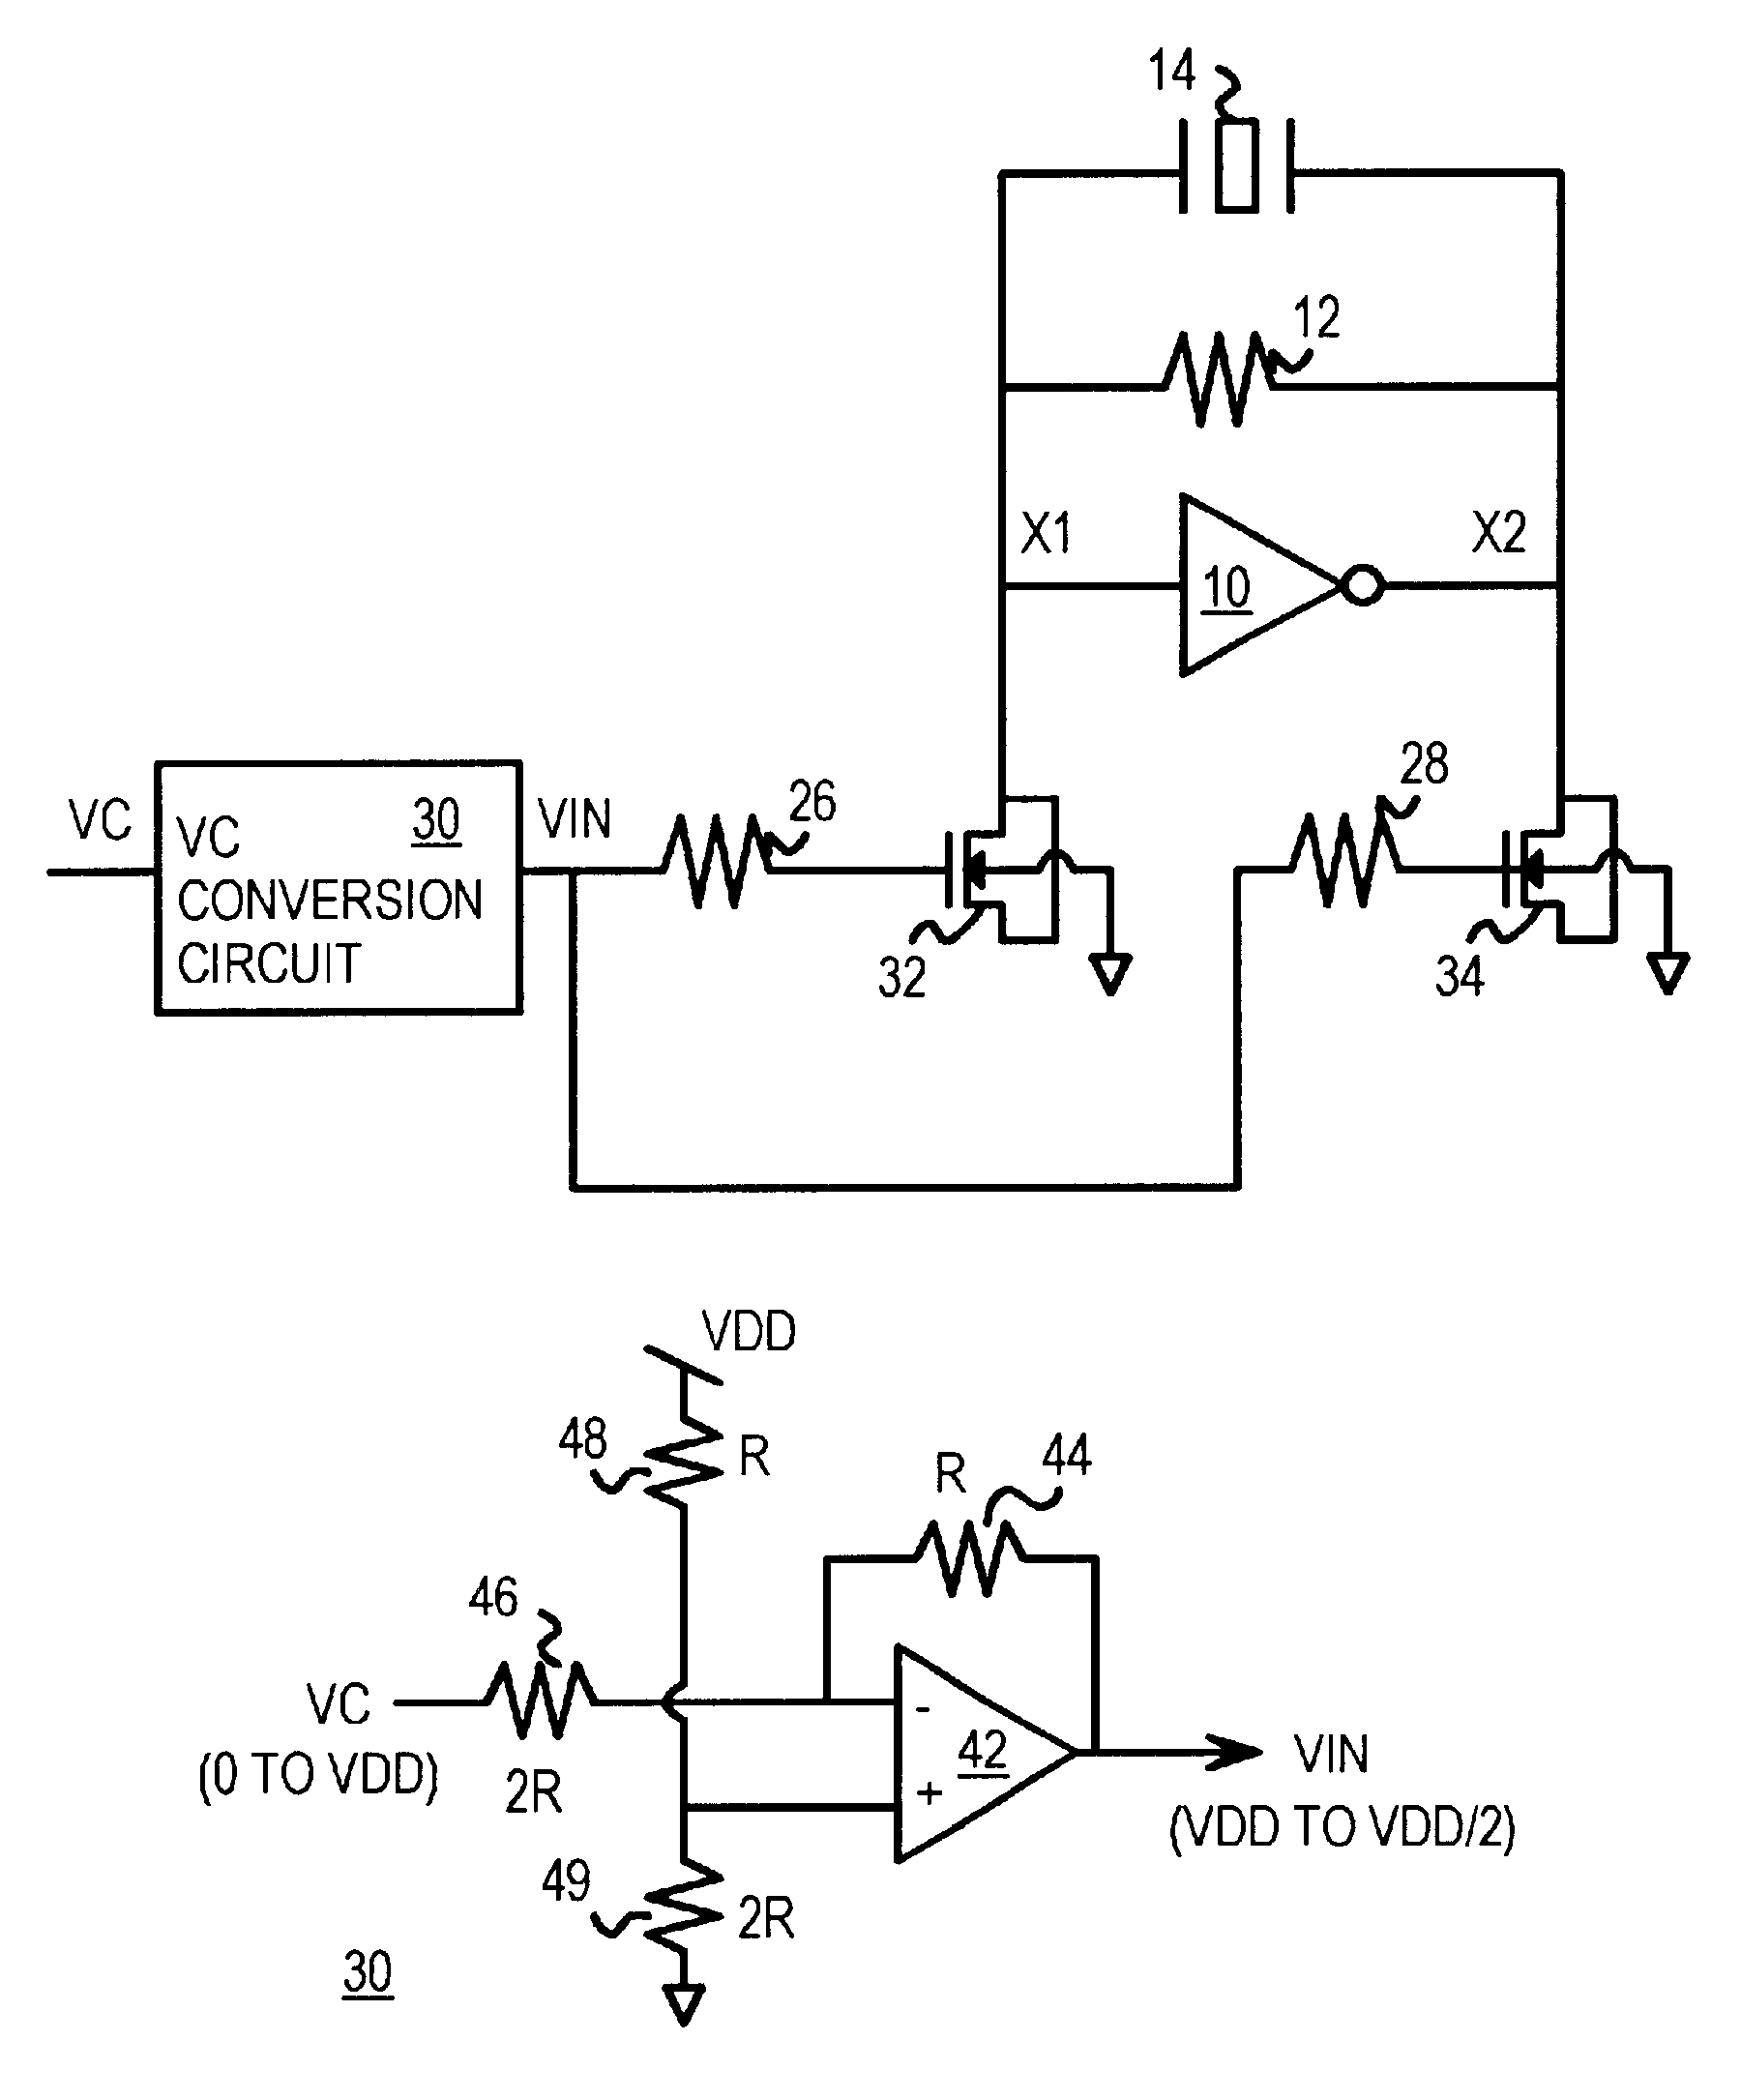 Voltage-controlled crystal oscillator (VCXO) using MOS varactors coupled to an adjustable frequency-tuning voltage